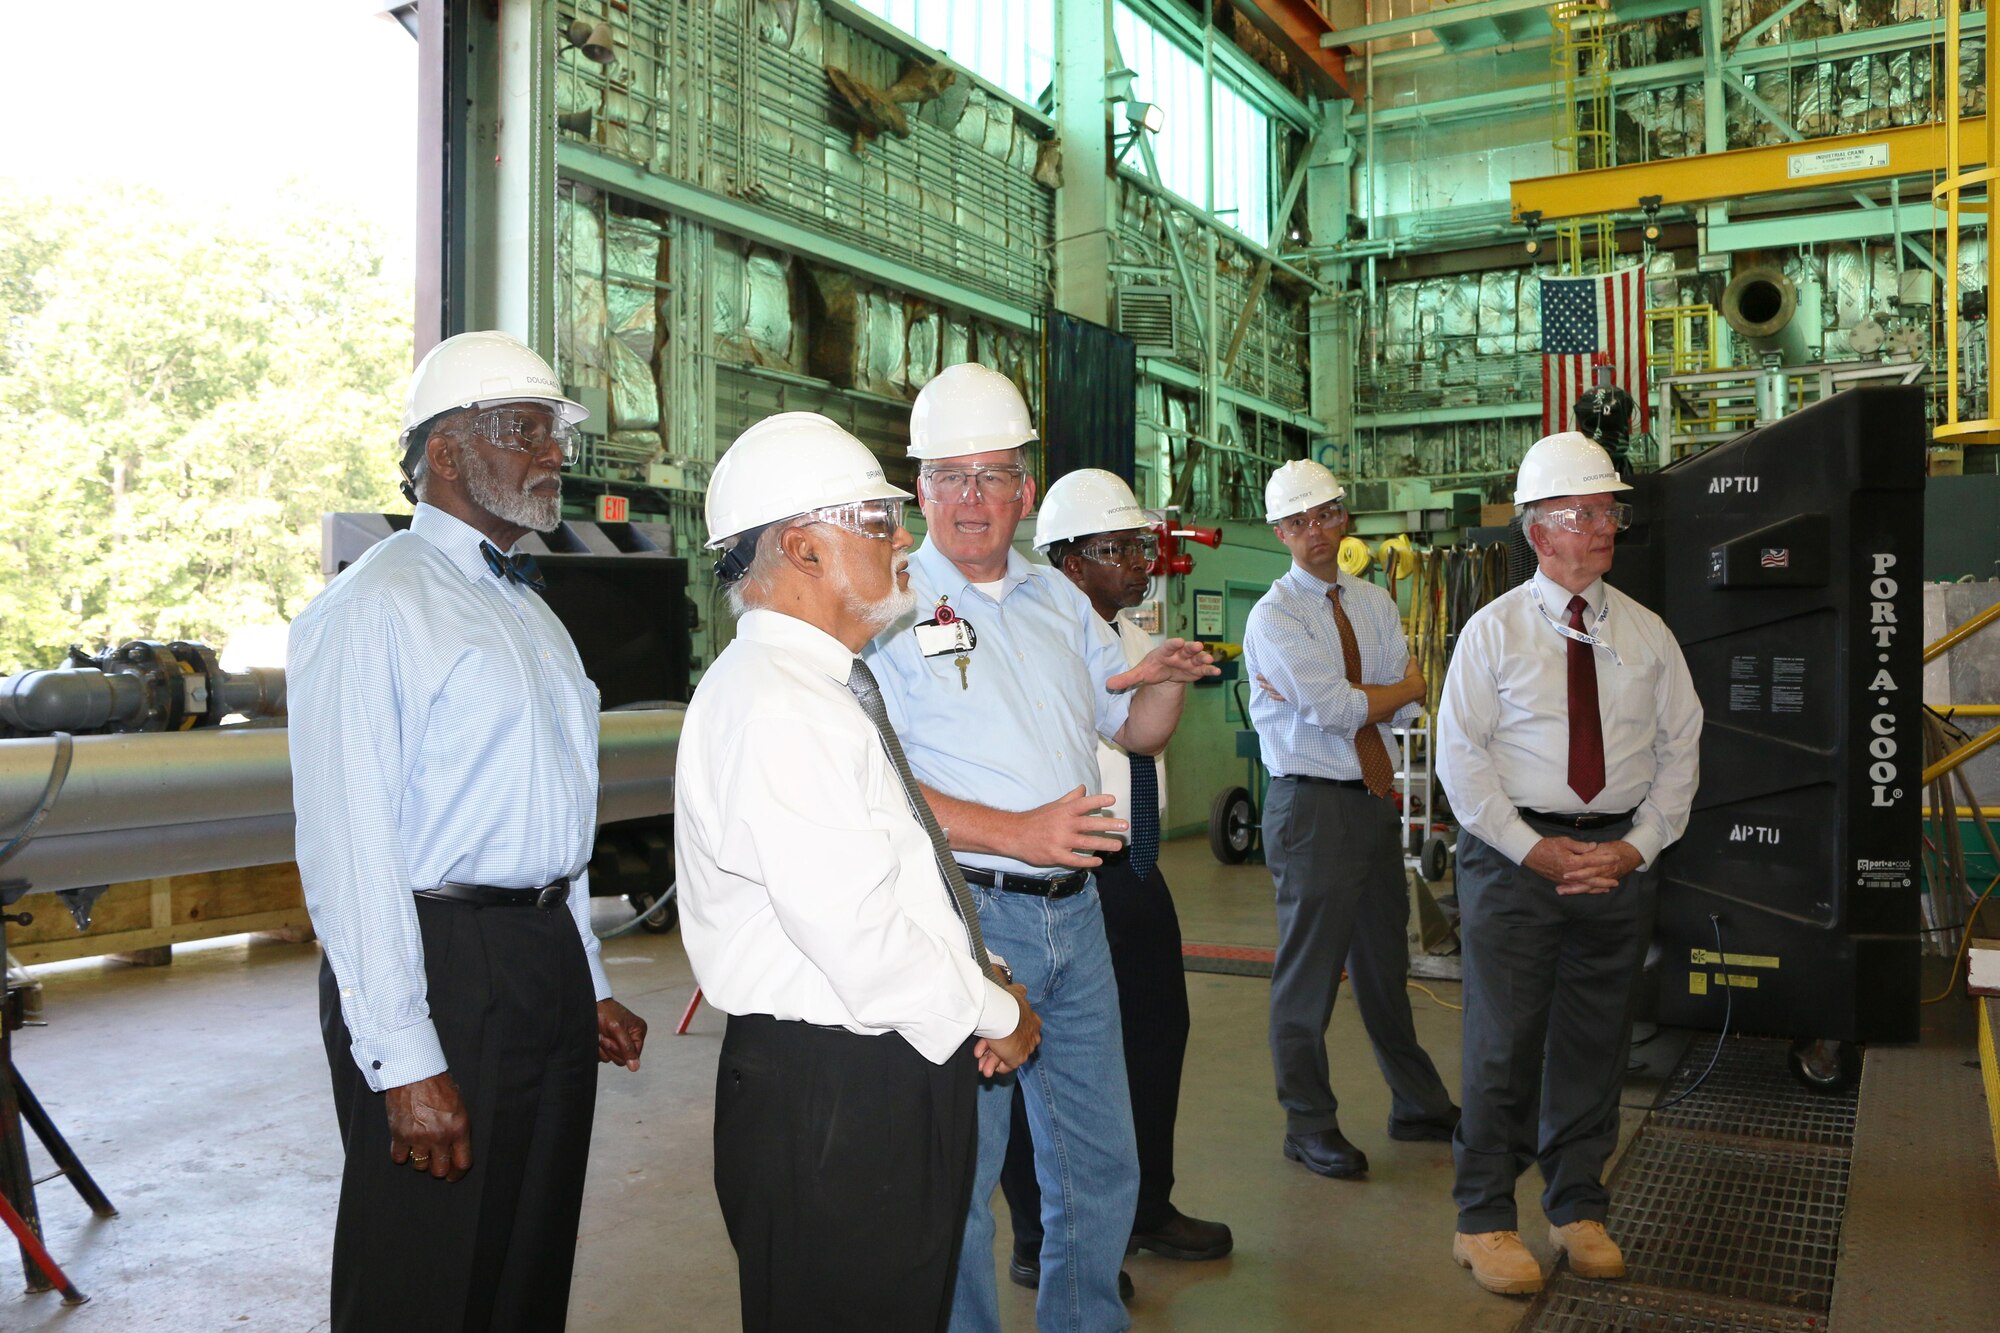 Dr. Doug Garrard, AEDC senior staff engineer, explains testing operations in the Aerodynamic and Propulsion Test Unit at the Complex to members of the National Aerospace Solutions, LLC Technical Advisory Board Sept. 9, 2016. APTU is a blow-down, true temperature and pressure test facility designed for testing the performance, operability and durability of supersonic and hypersonic missile scale flight system hardware including propulsion systems and materials. The NAS TAB members toured several test facilities with the AEDC Test Operations and Sustainment contractor. Pictured left to right is Dr. Wesley Harris, with Massachusetts Institute of Technology; Dr. Krishan Ahuja, with Georgia Institute of Technology; Garrard; Dr. Woodrow Whitlow, NAS technical director; Dr. Edward White, Texas A&M University; and Doug Pearson, NAS deputy general manager. (U.S. Air Force photo/Holly Peterson)